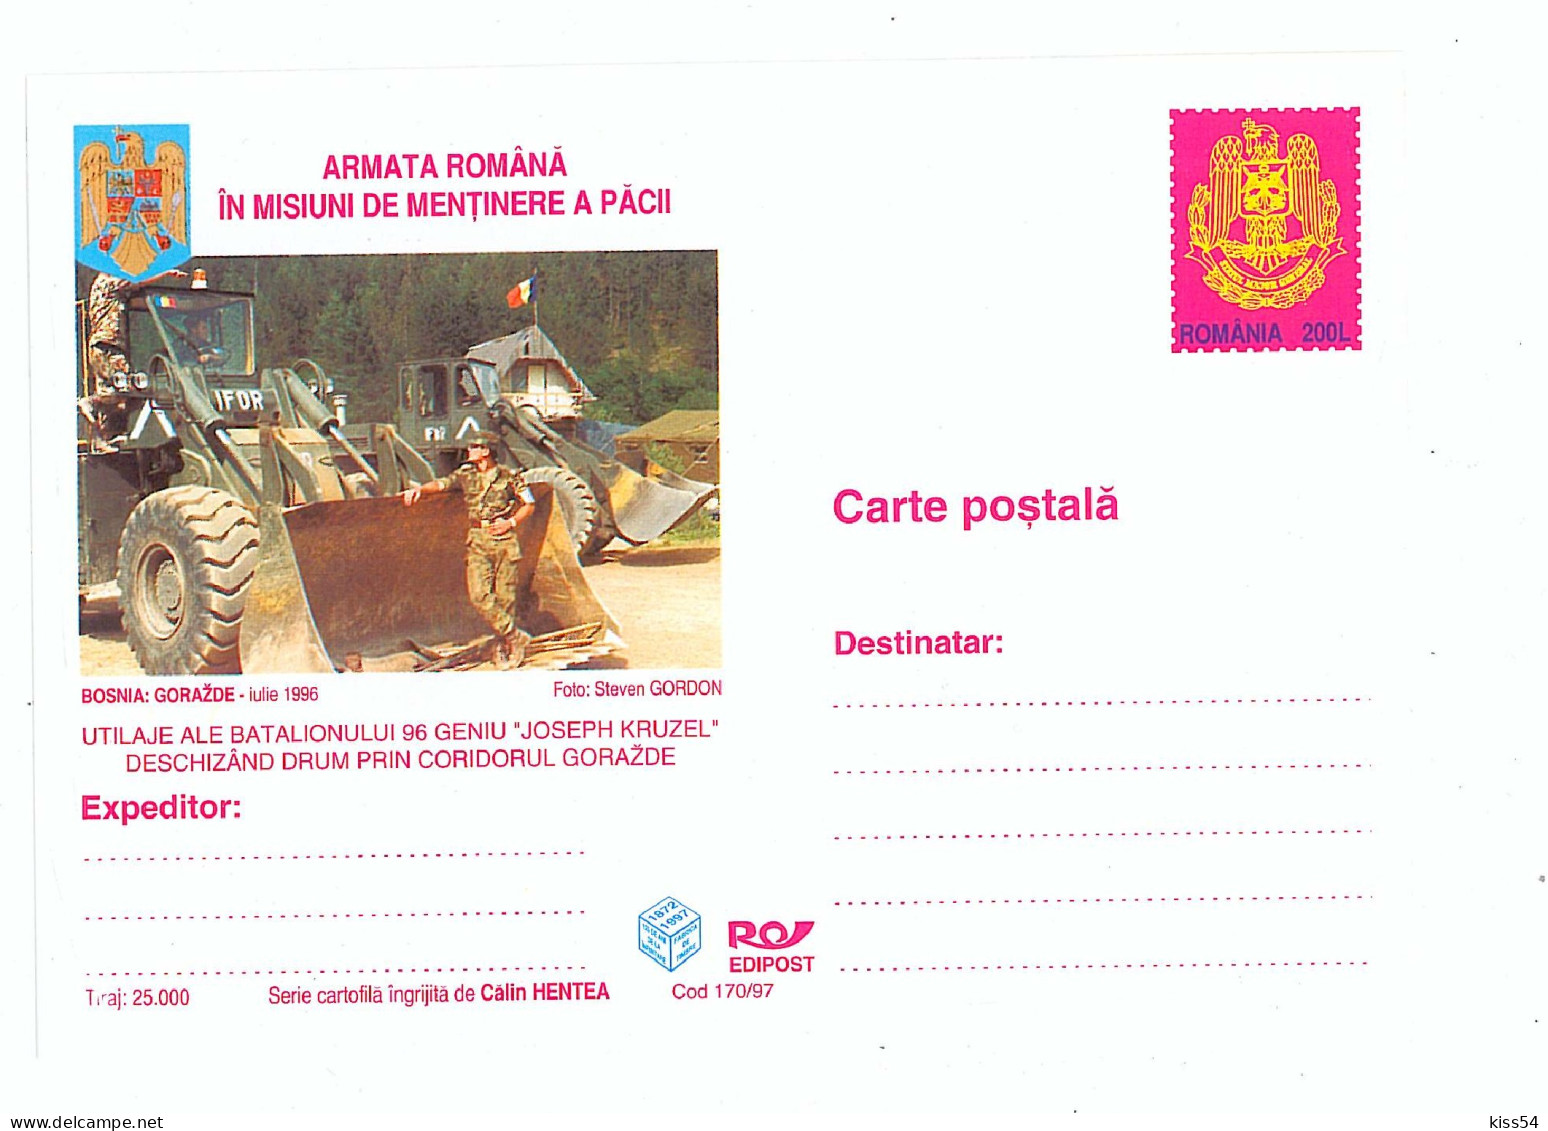 IP 97 - 170 NATO, Romanian Army In Peacekeeping Missions - Stationery - Unused - 1997 - Postal Stationery